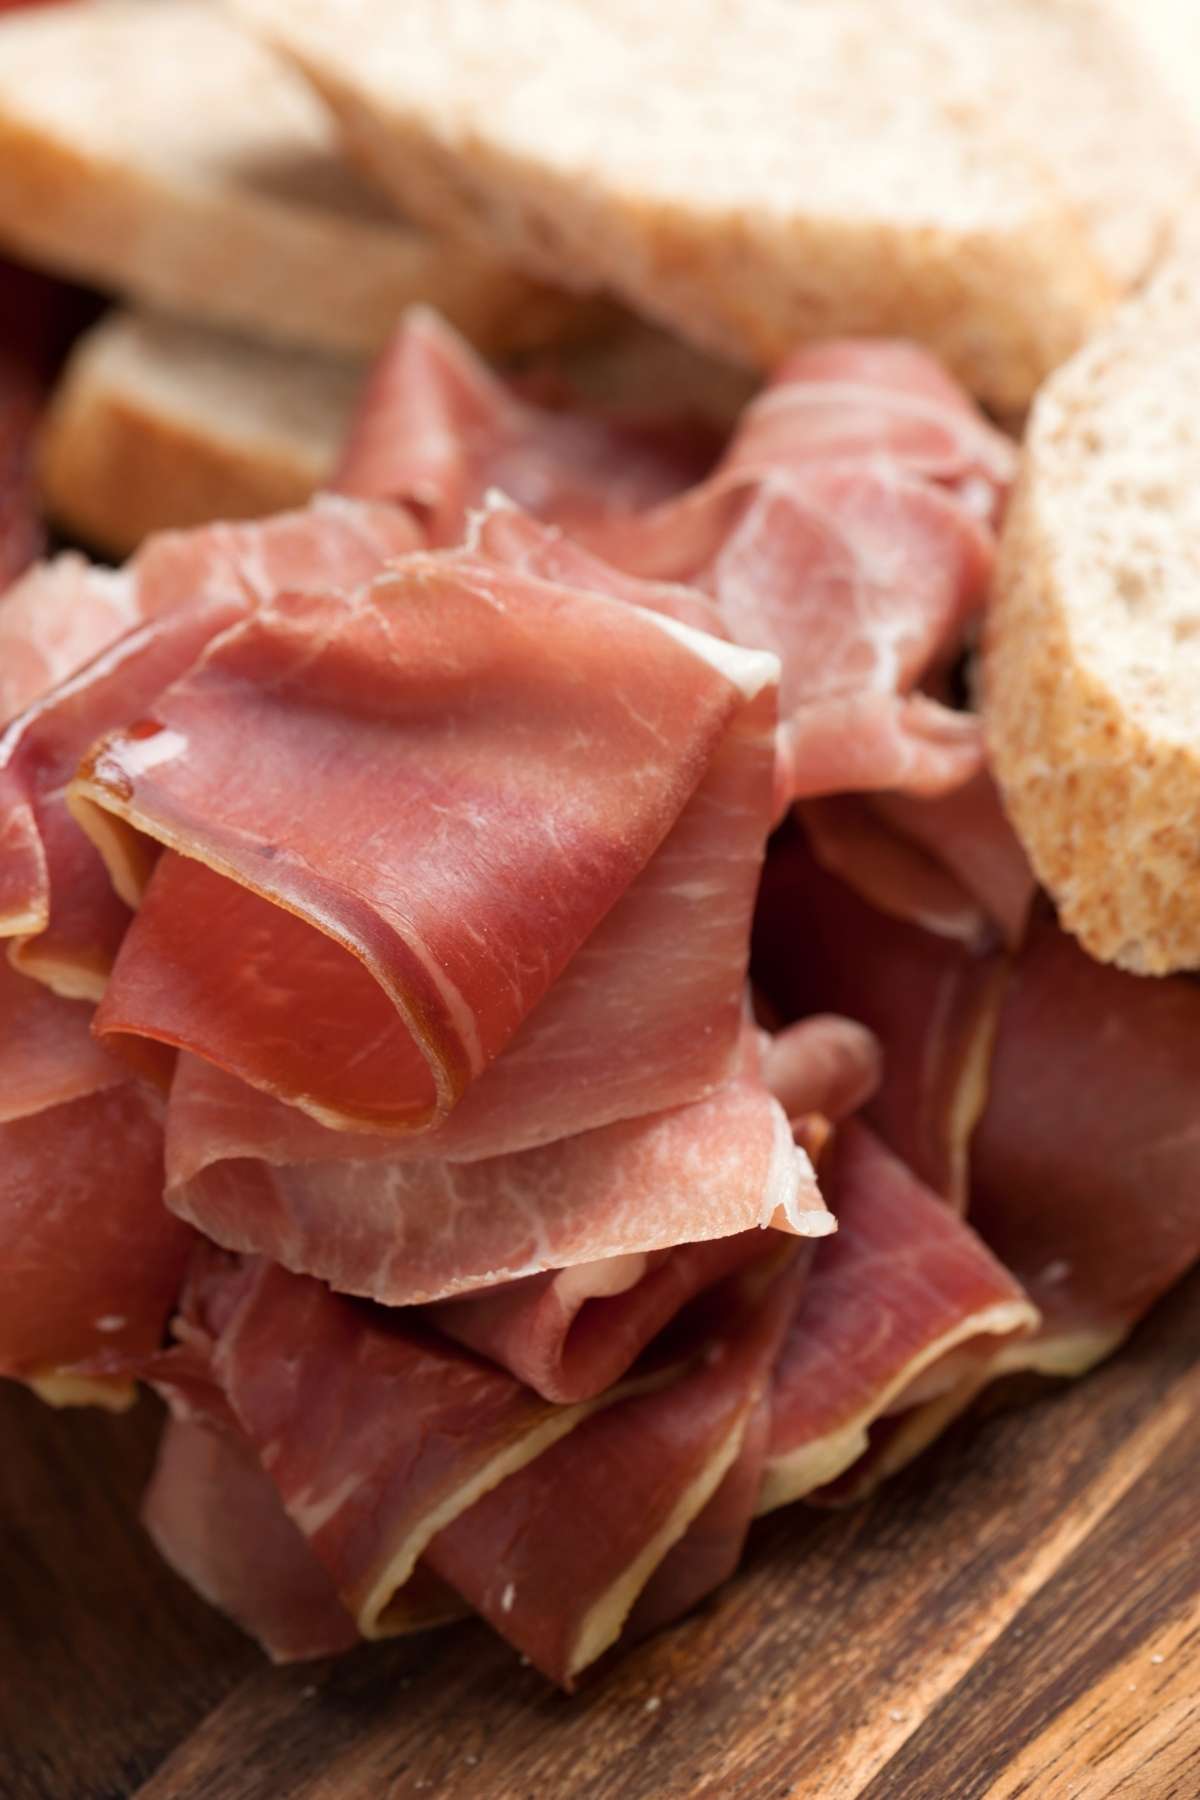 Prosciutto is a type of dry-cured Italian ham. It is often served in sandwiches, on pizza, with fruit, and on charcuterie boards. Today we’re taking a closer look at prosciutto, the different types that are available, and how it's prepared.